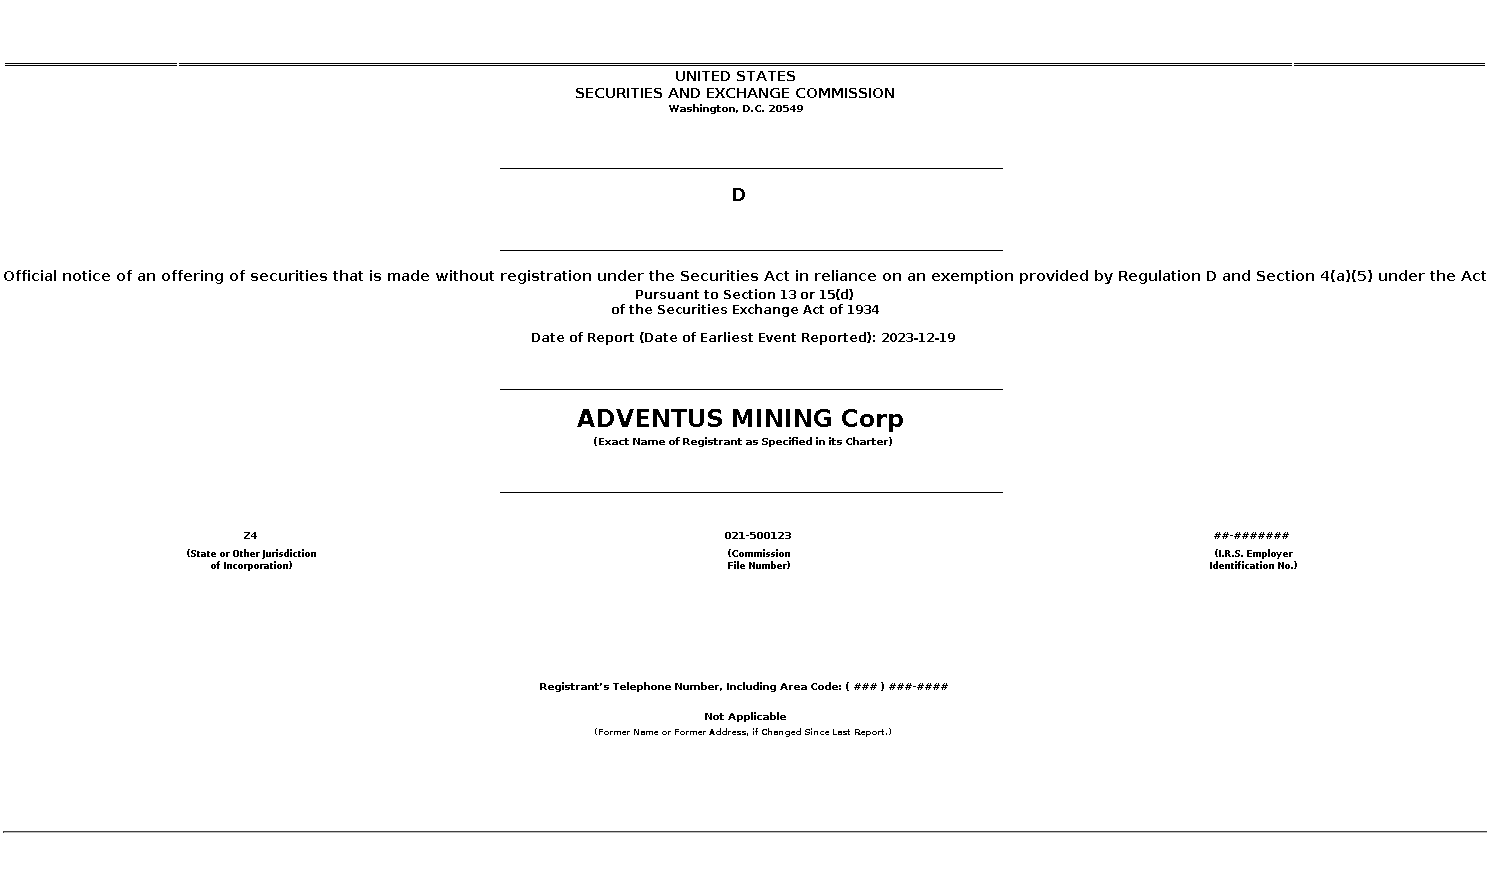 ADVZF : D Official notice of an offering of securities that is made without registration under the Securities Act in reliance on an exemption provided by Regulation D and Section 4(a)(5) under the Act